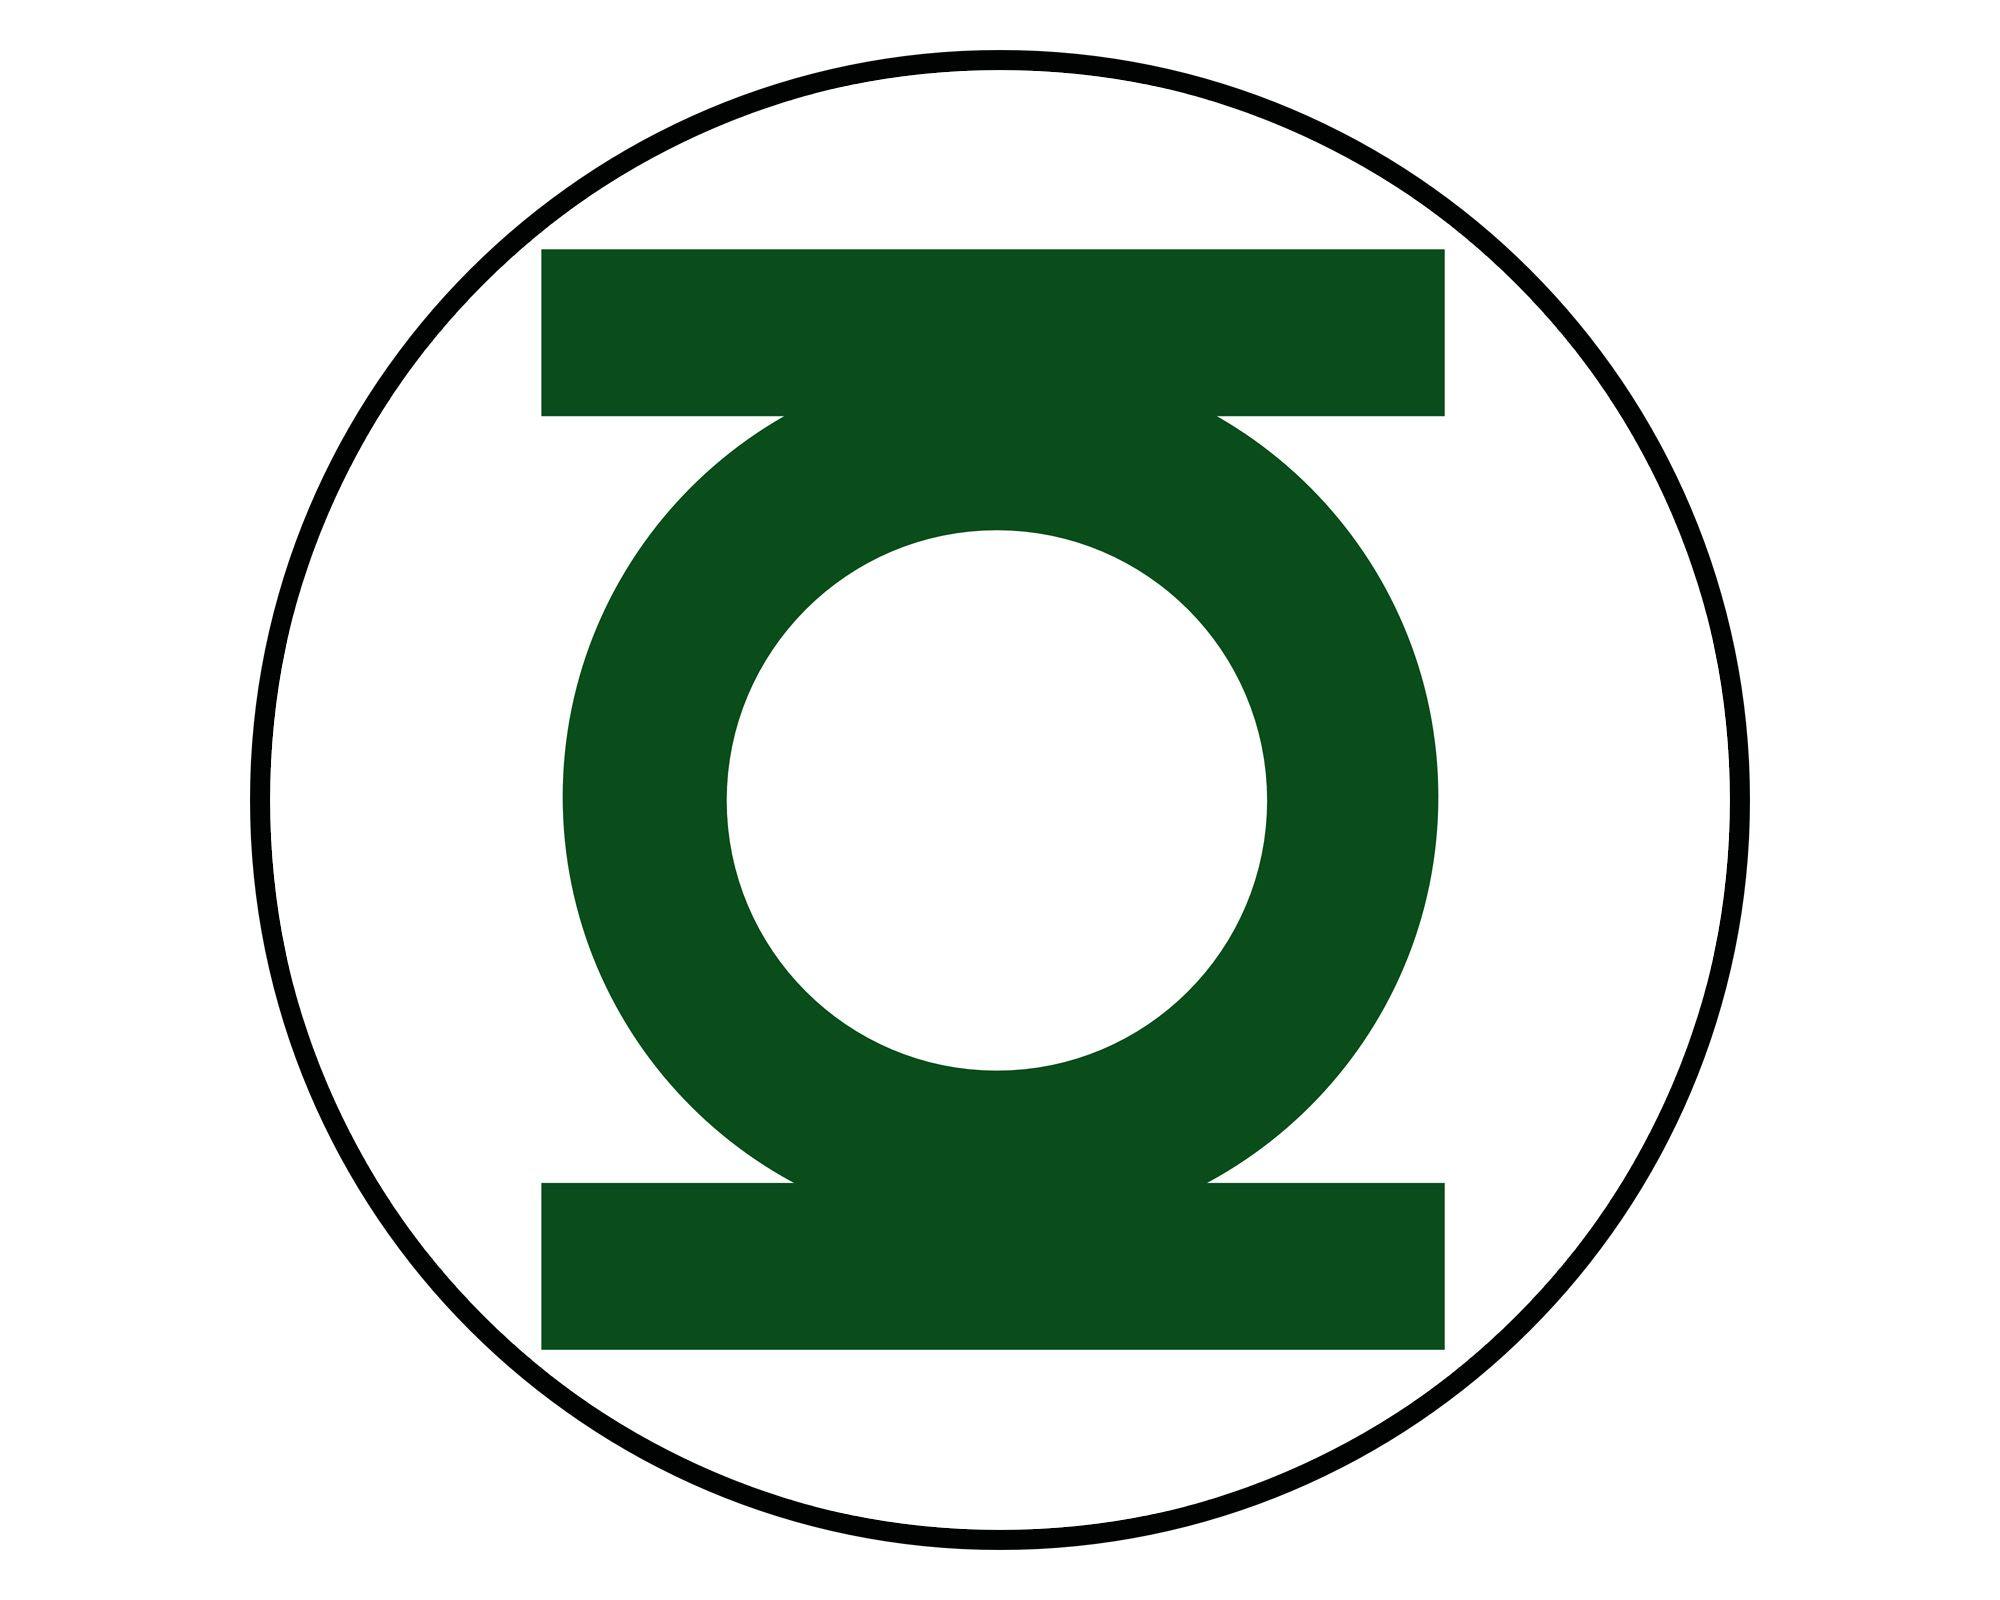 Green Lantern Logo - Green Lantern Logo, Green Lantern Symbol, Meaning, History and Evolution